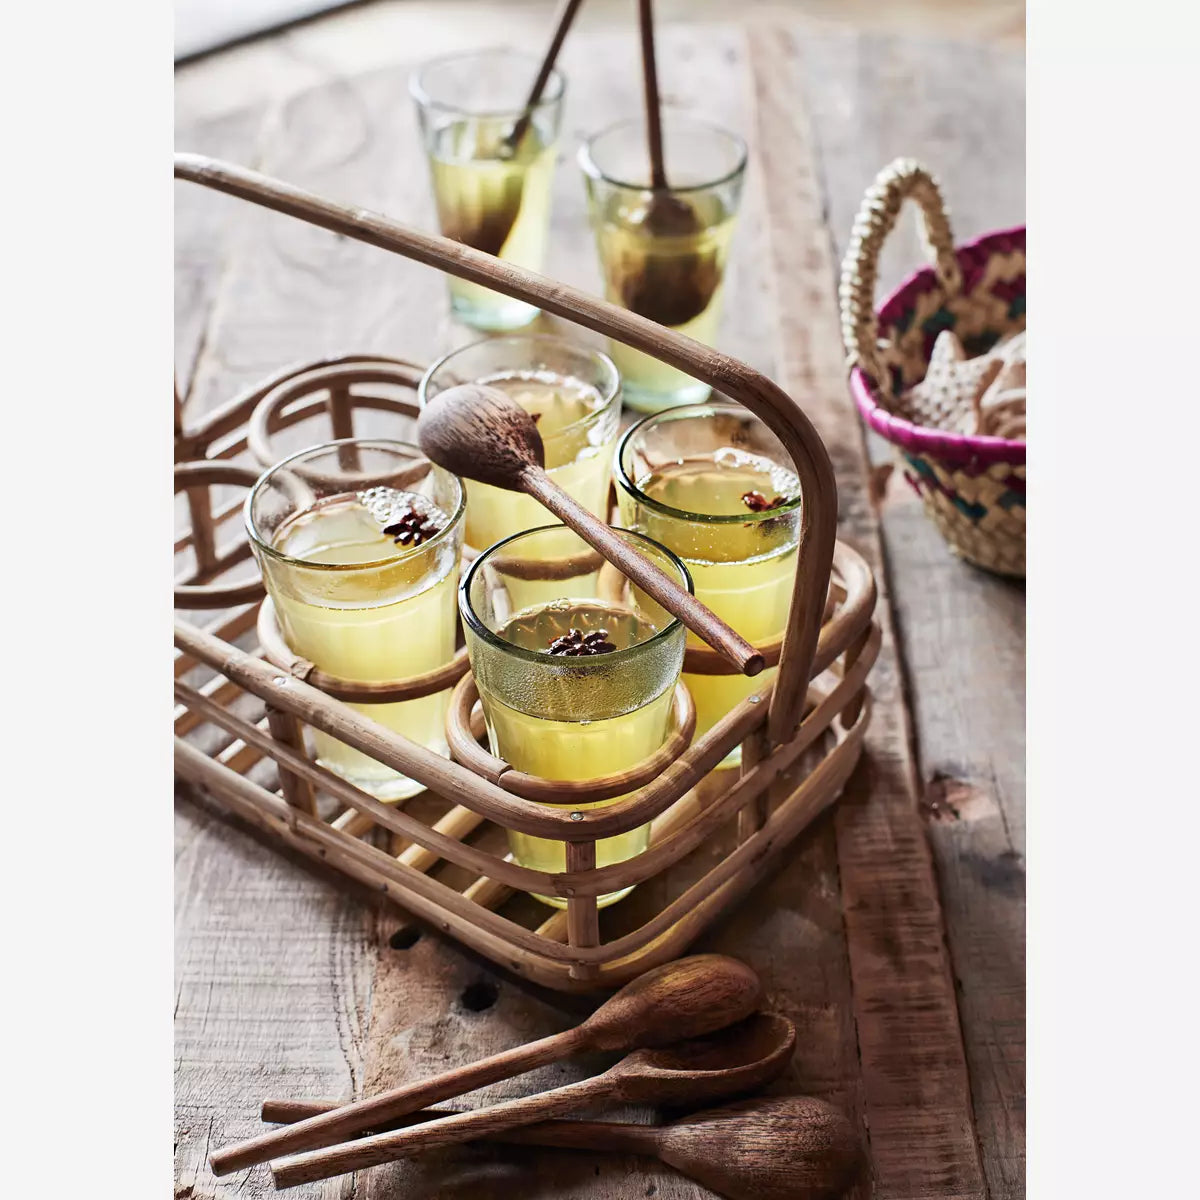 Bamboo Drinking Glass Holder & Glasses By Madam Stoltz